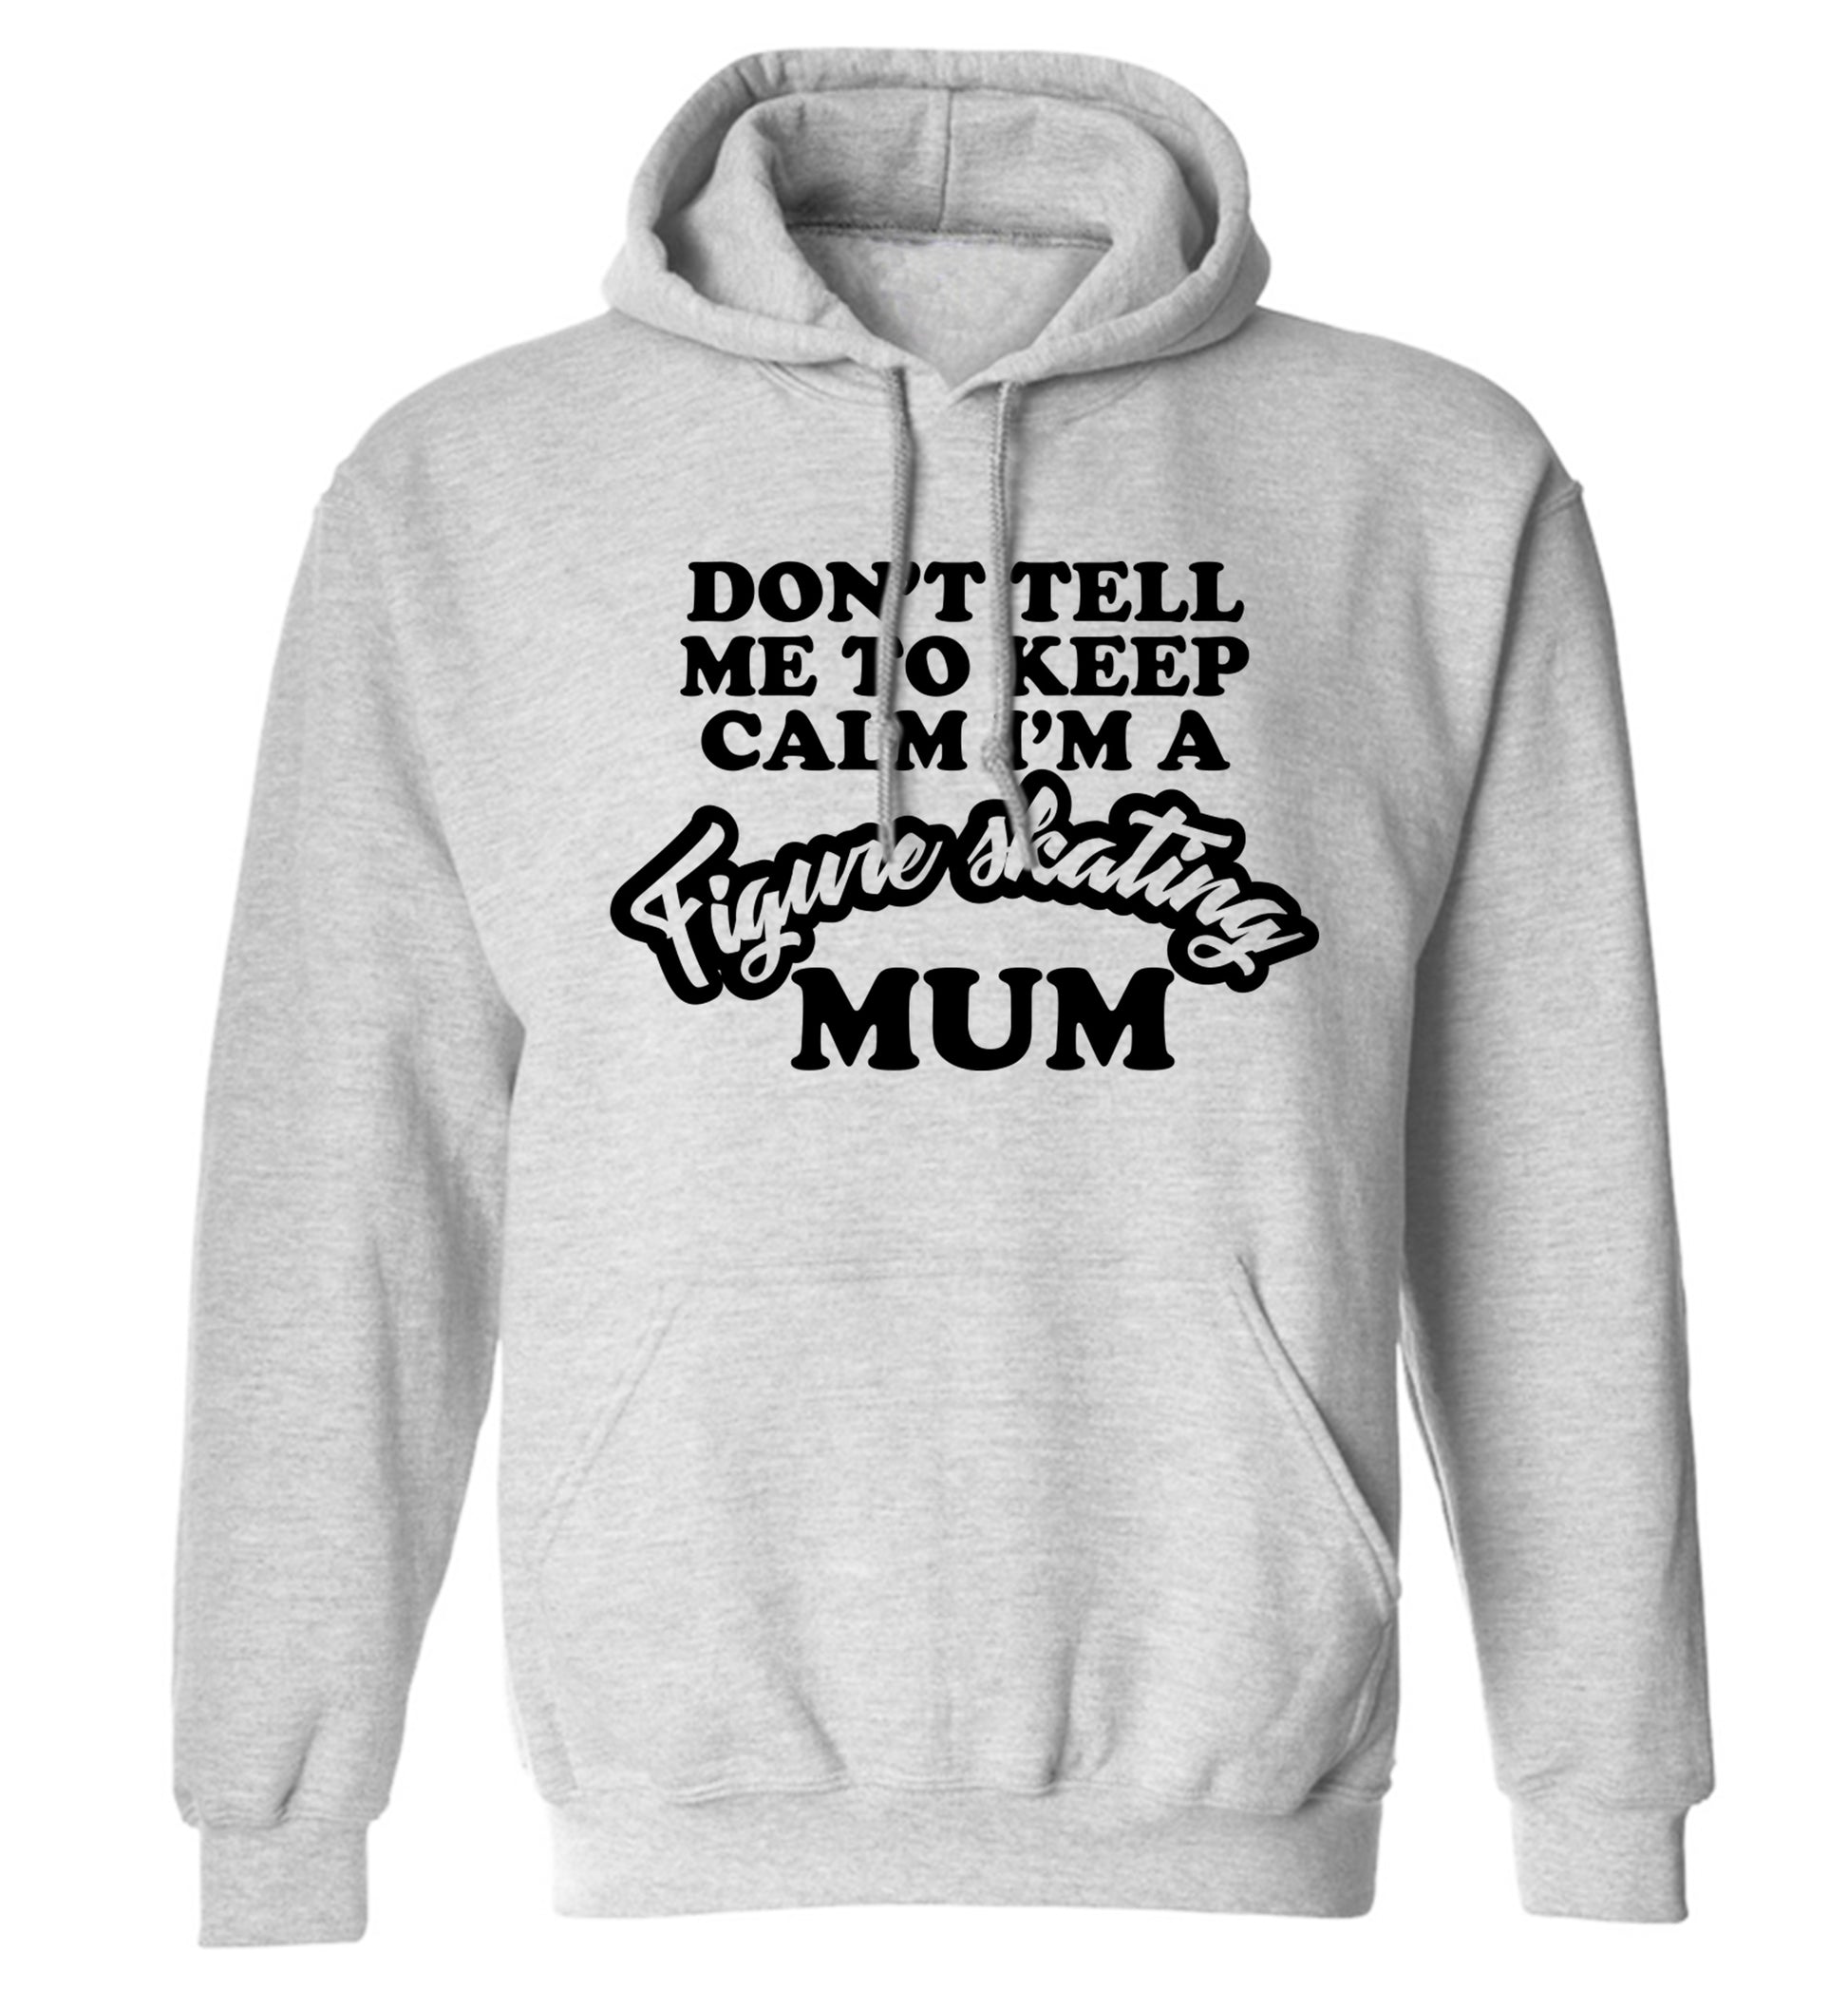 Don't tell me to keep calm I'm a figure skating mum adults unisexgrey hoodie 2XL